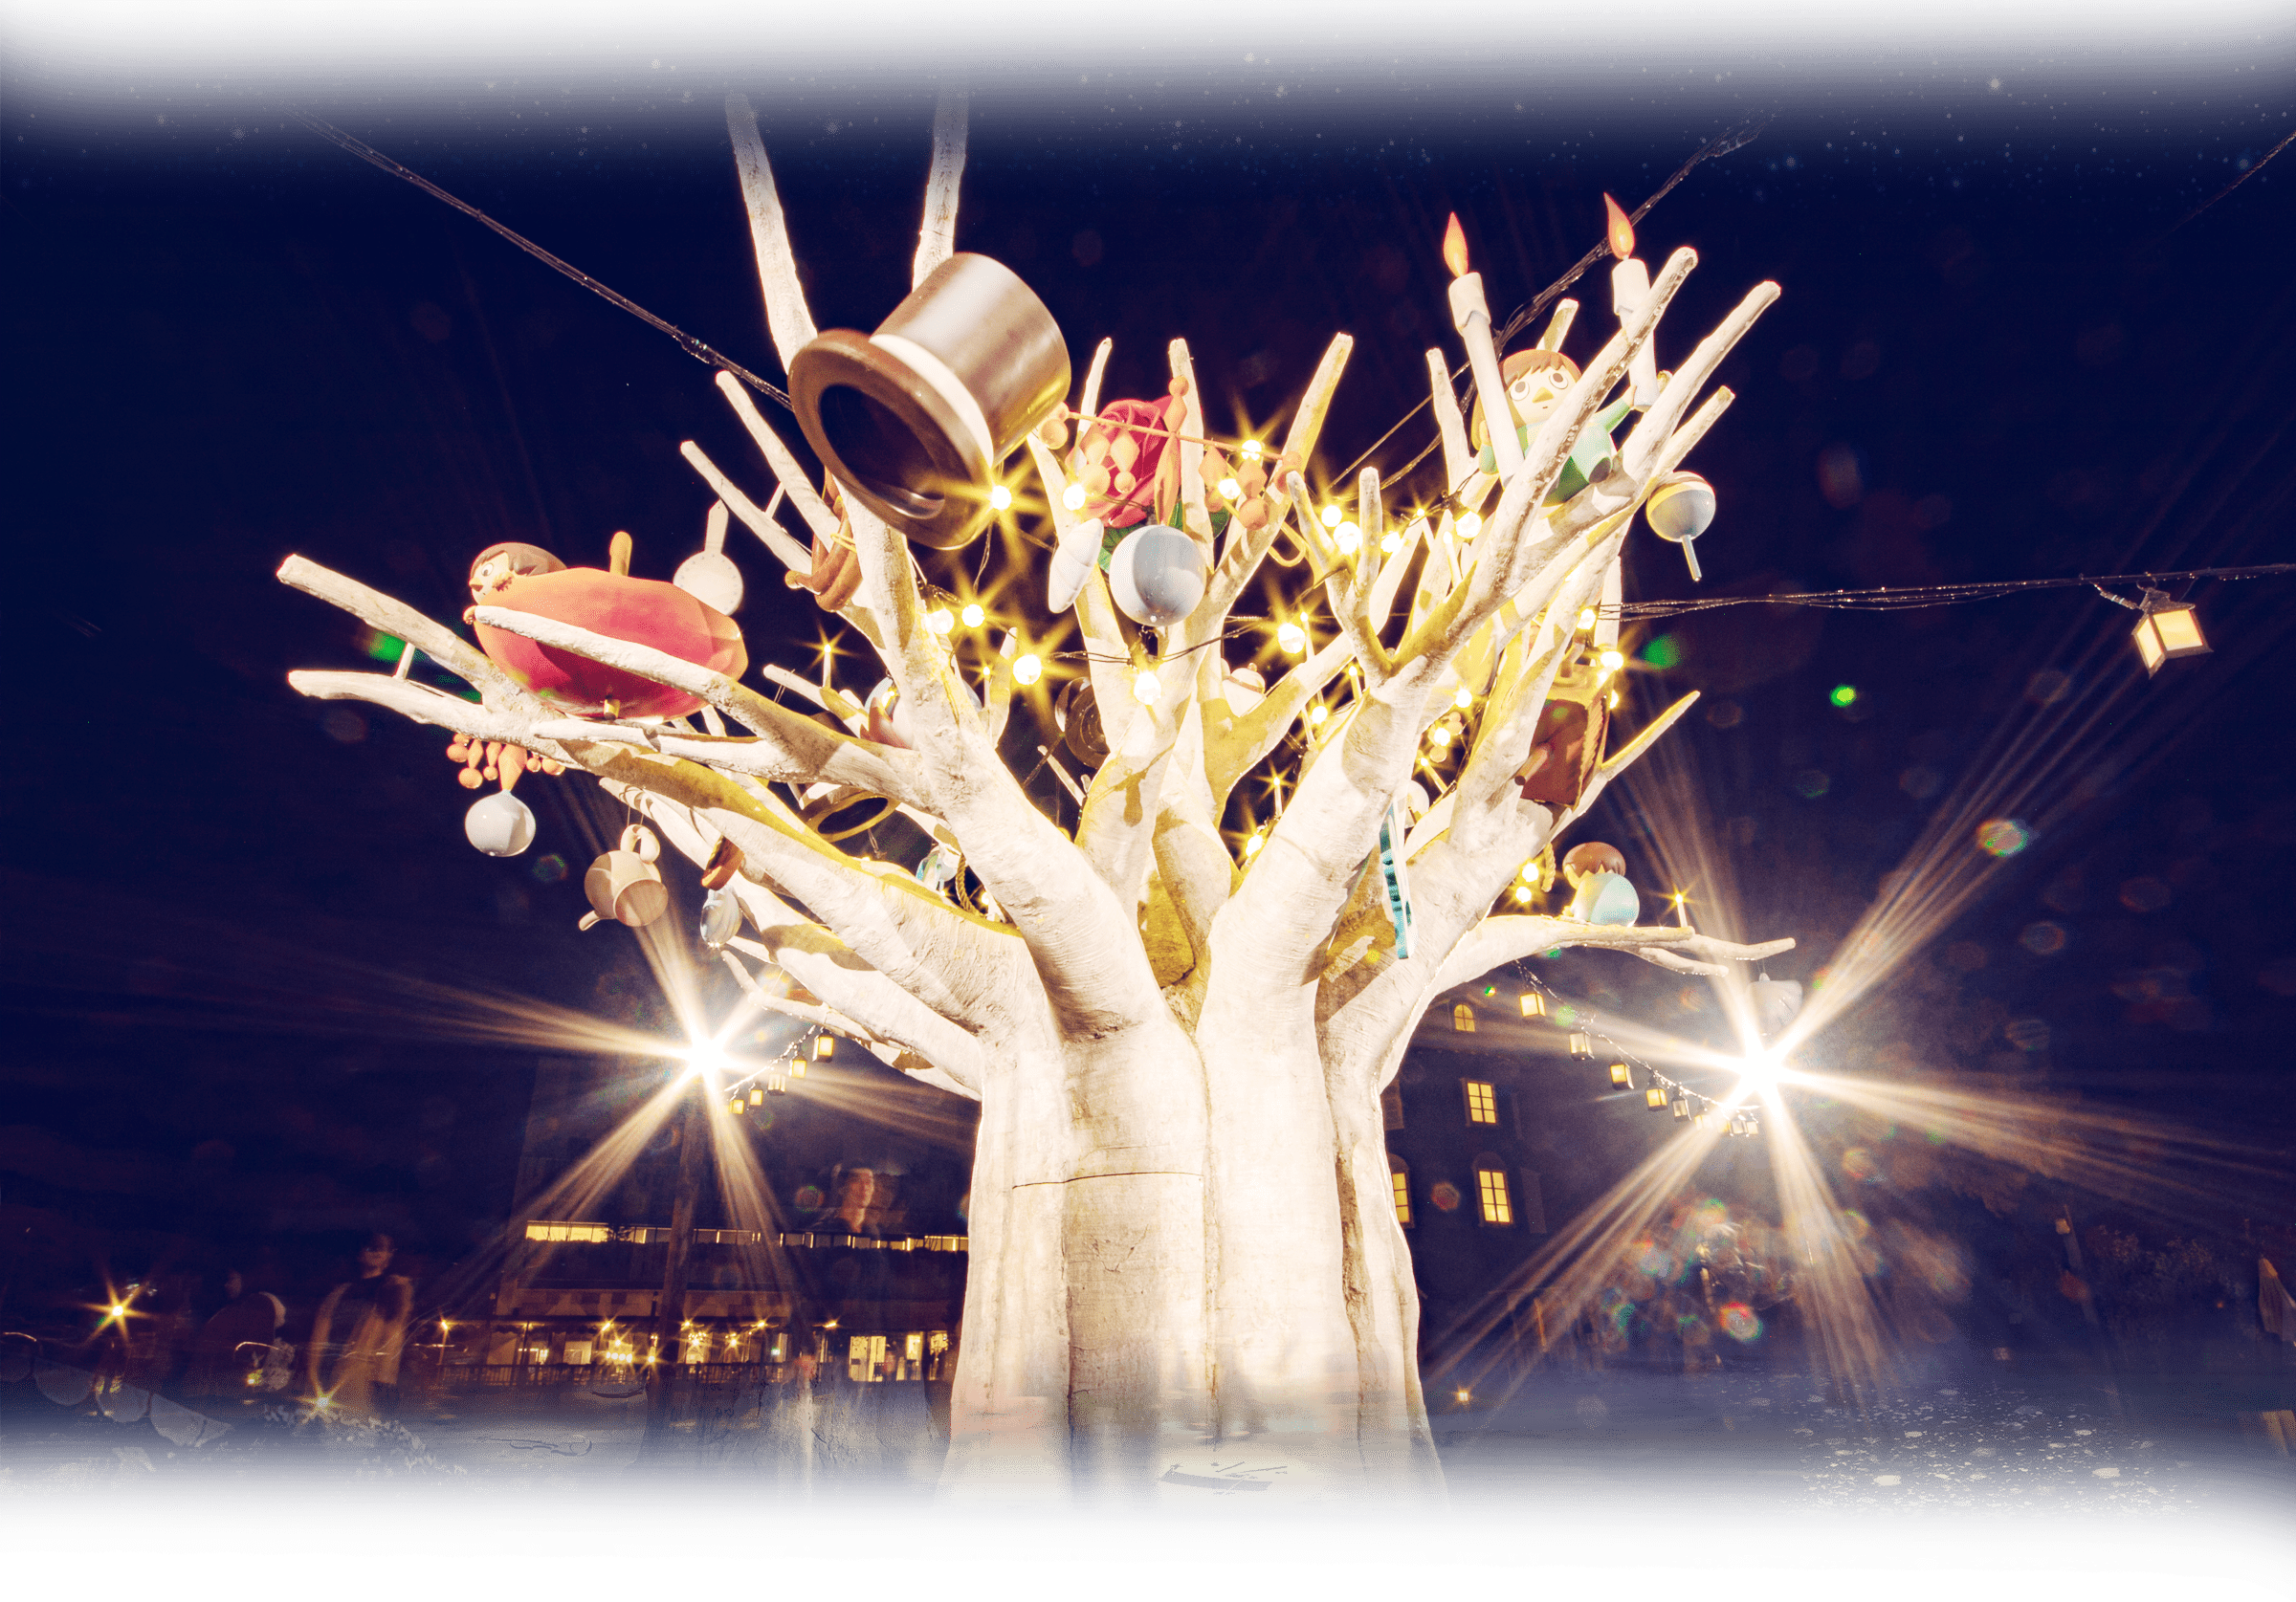 The tree of Orchestra